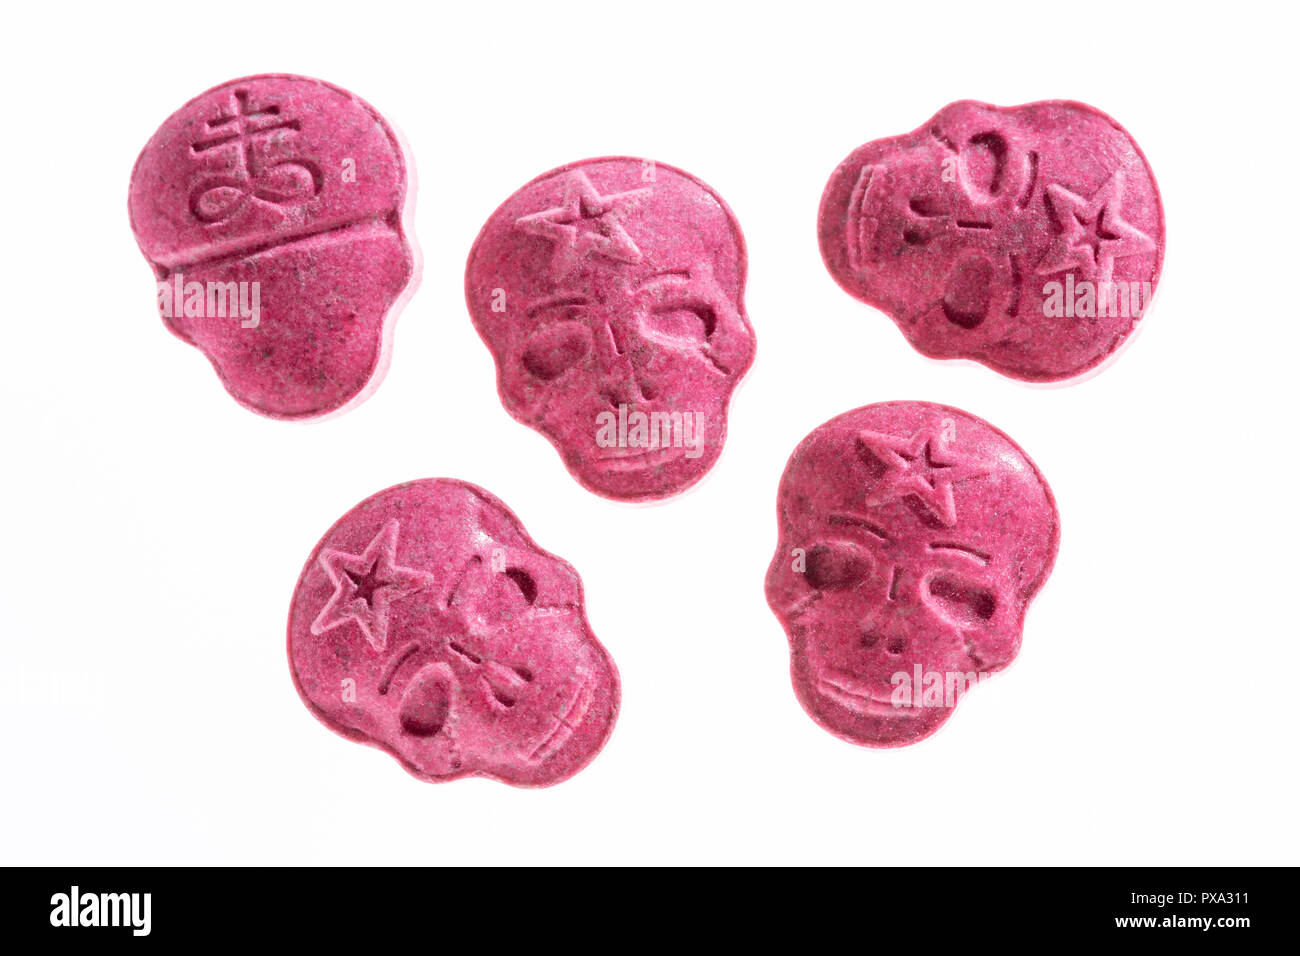 Five Red Army Skull, Ecstasy, MDMA or medication pills shaped like a skull isolated on a white background. Stock Photo